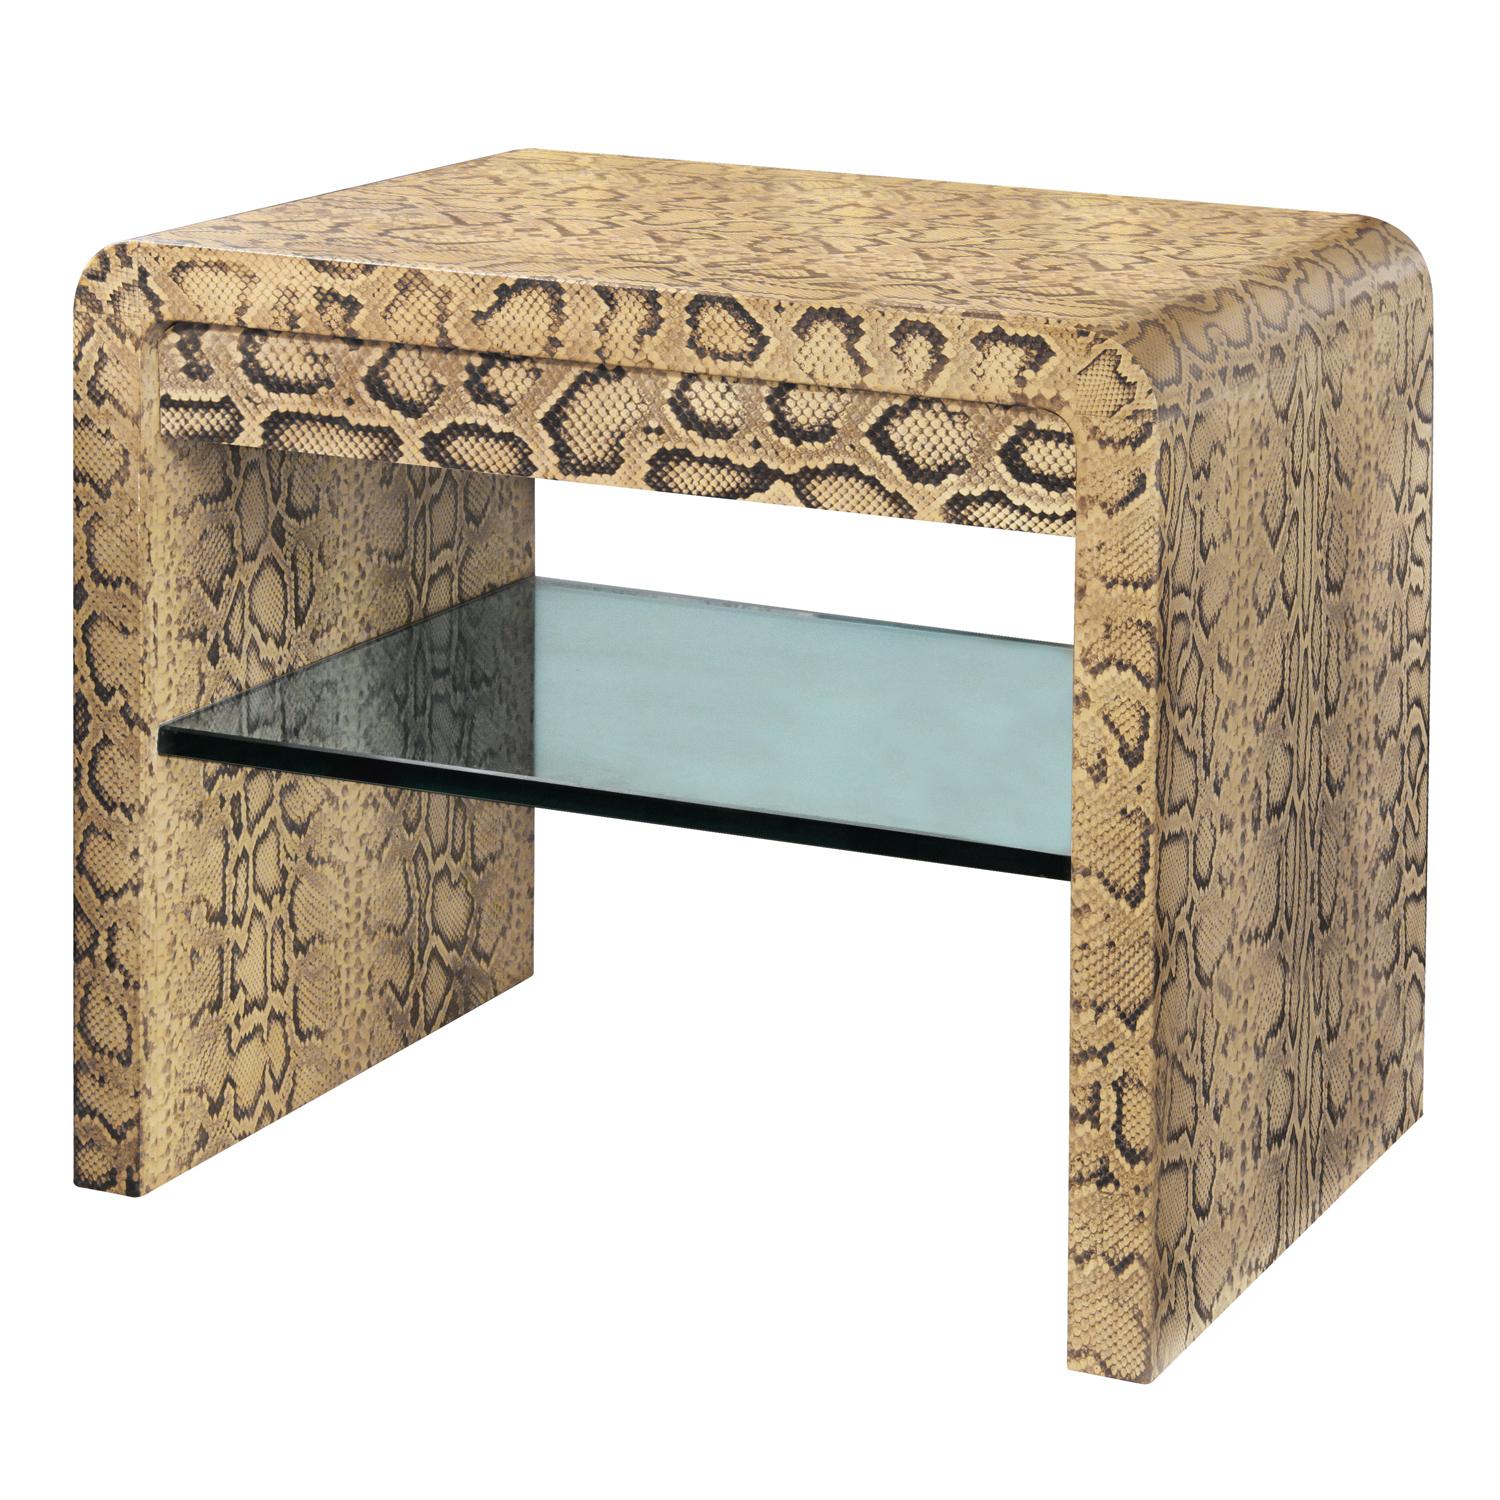 Modern Karl Springer Waterfall Side Table in Python with Stainless Steel Drawer 1970s